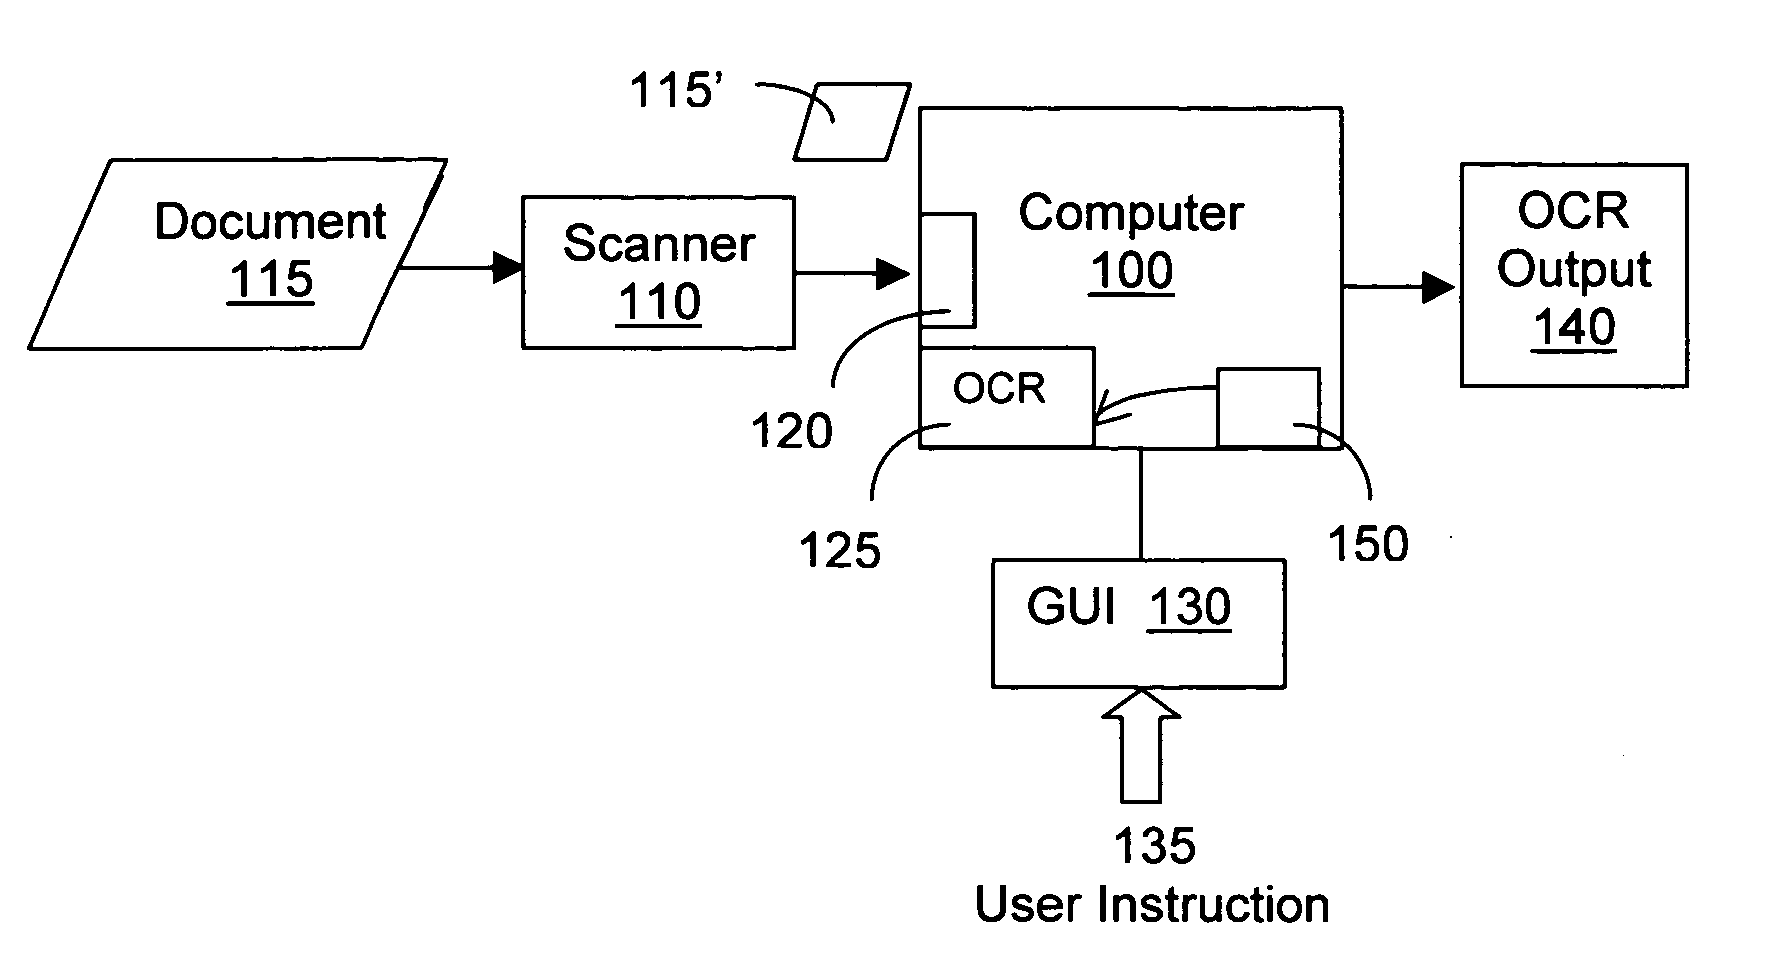 User control of computer peripheral apparatuses to perform tasks according to user input image file